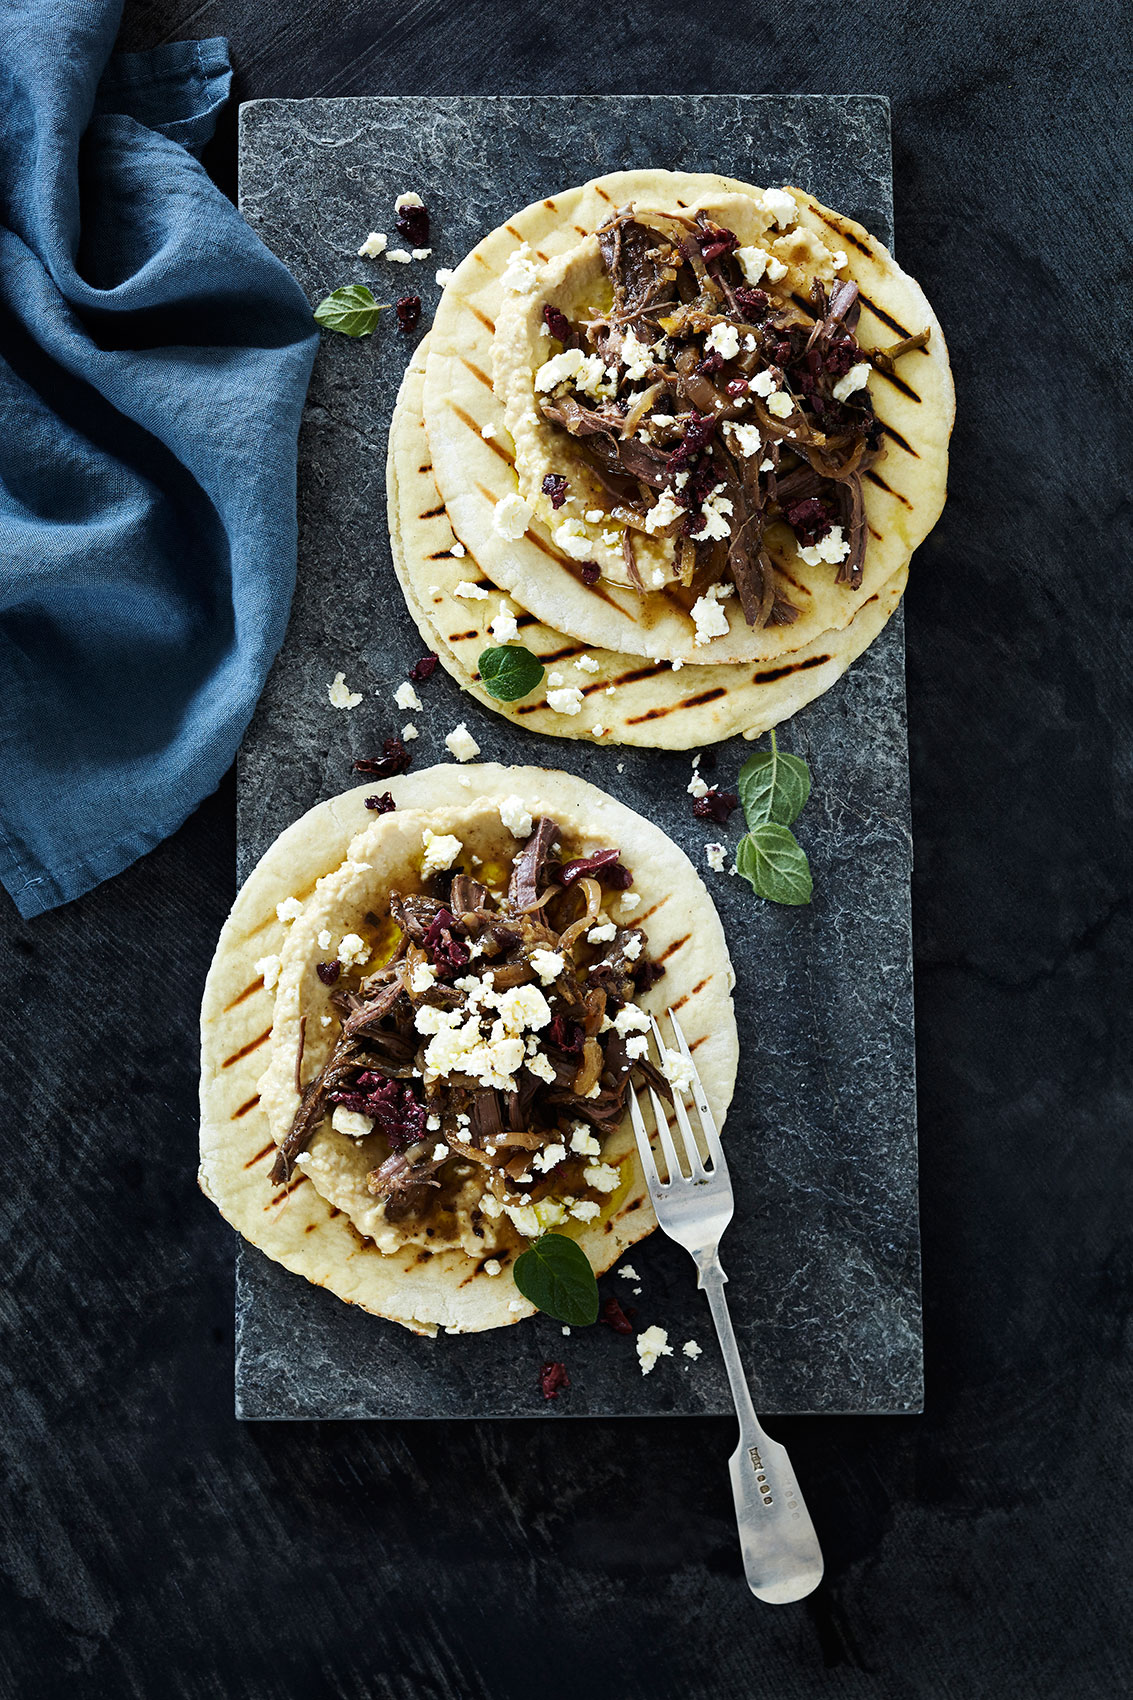 Slow Cooked • Oregano Braised Beef with Ricotta on Charred Pita • Cookbook & Editorial Food Photography